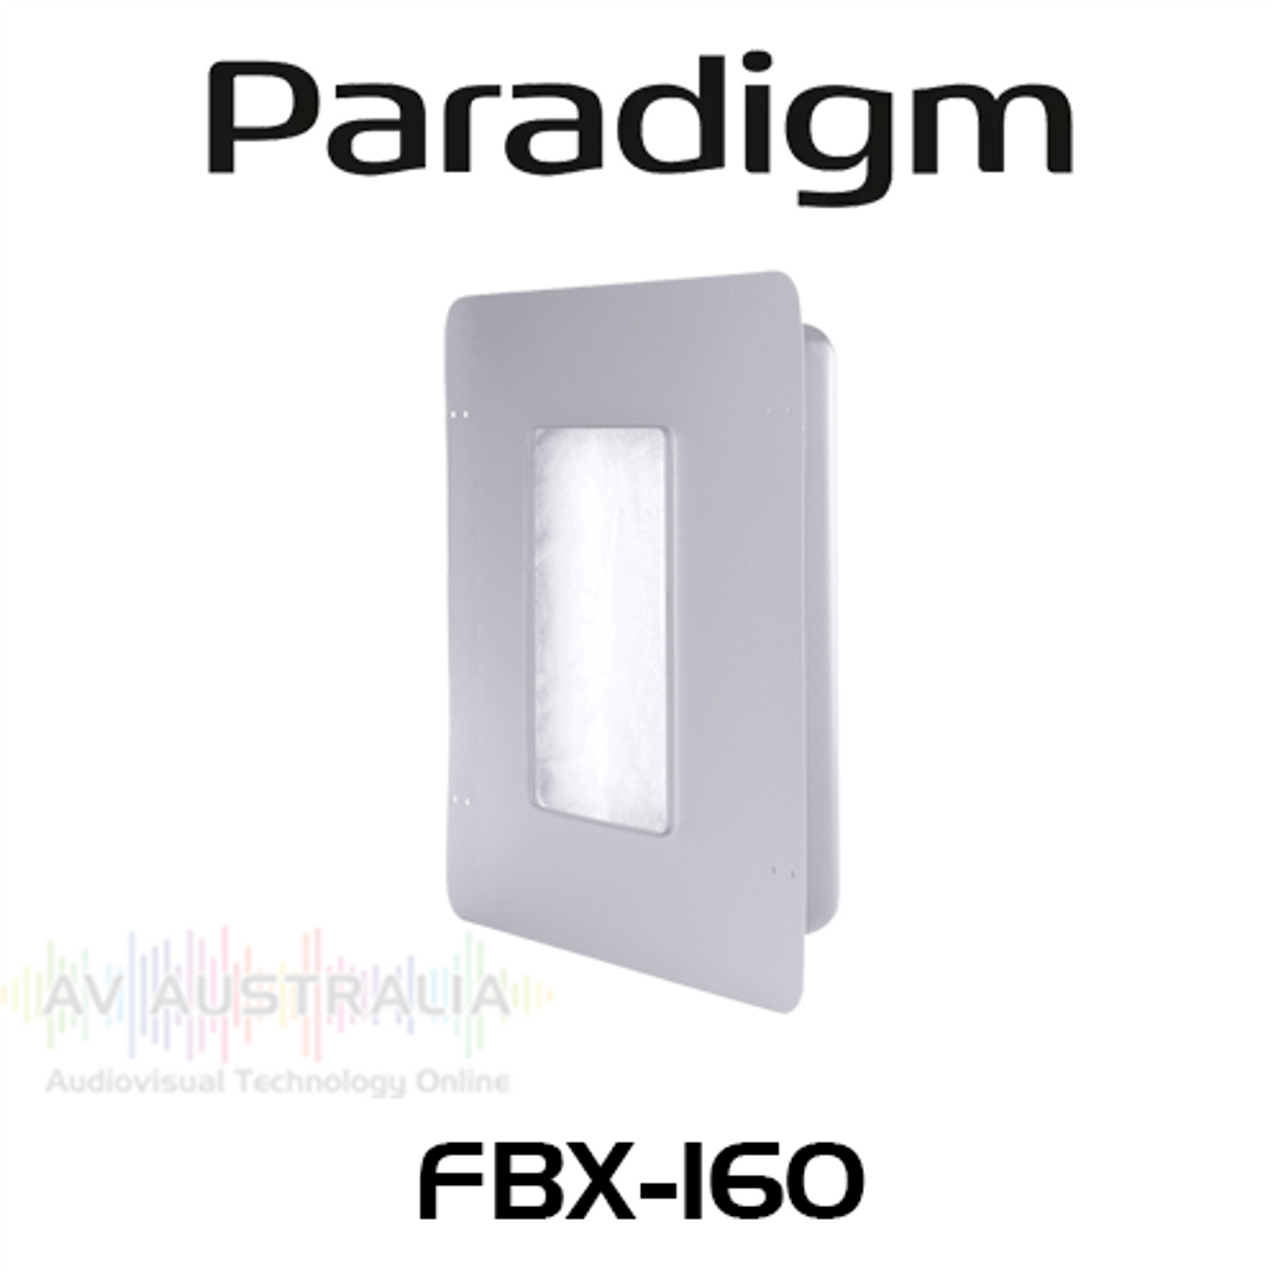 Paradigm FBX-160 In-Ceiling / In-Wall Application Fireproof Back Box (Each)